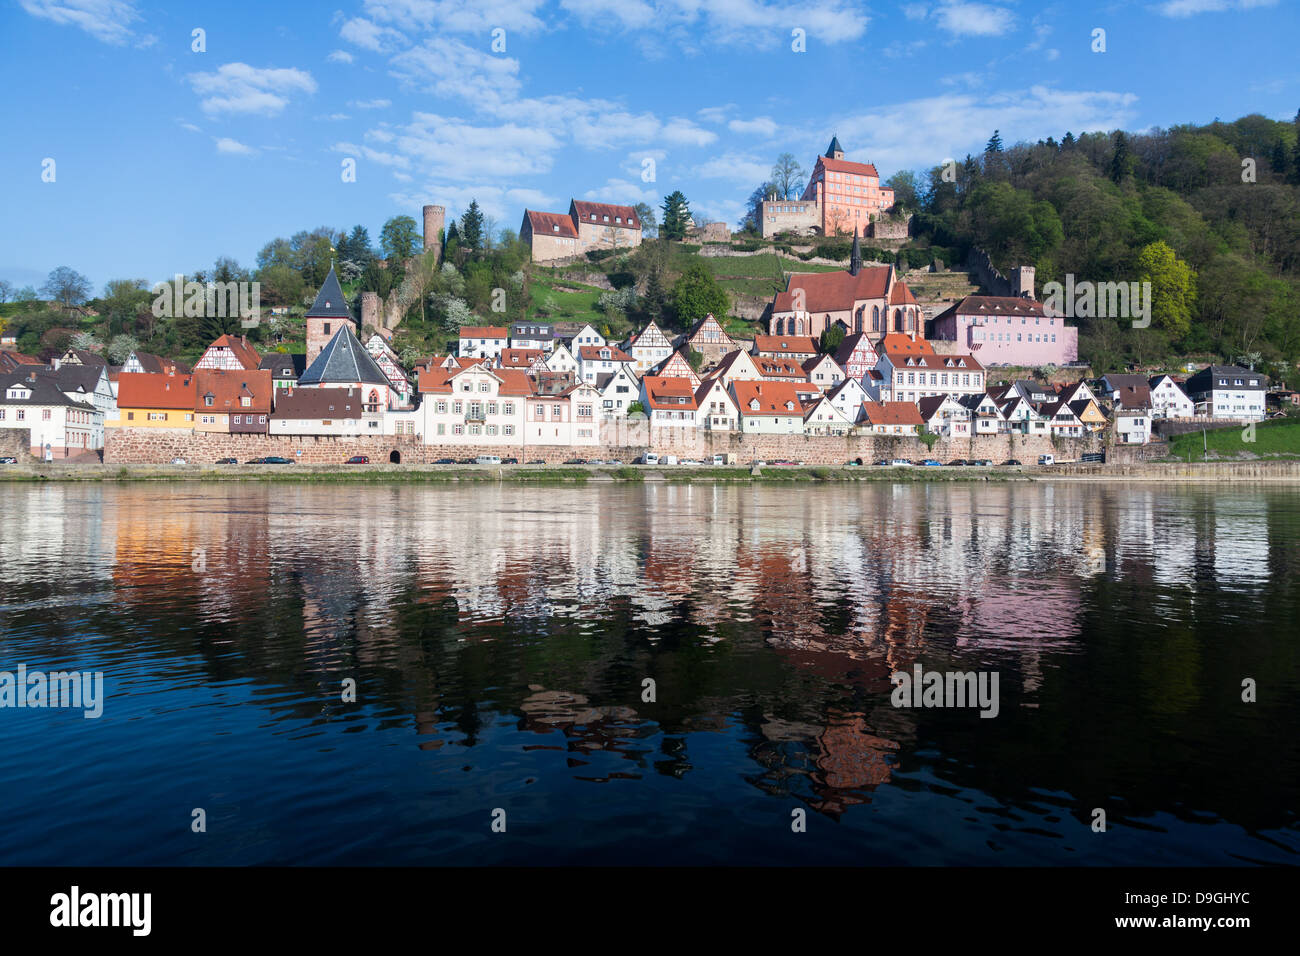 Germany - Ancient town village of Hirschhorn in Hesse district of on banks of Neckar river Stock Photo